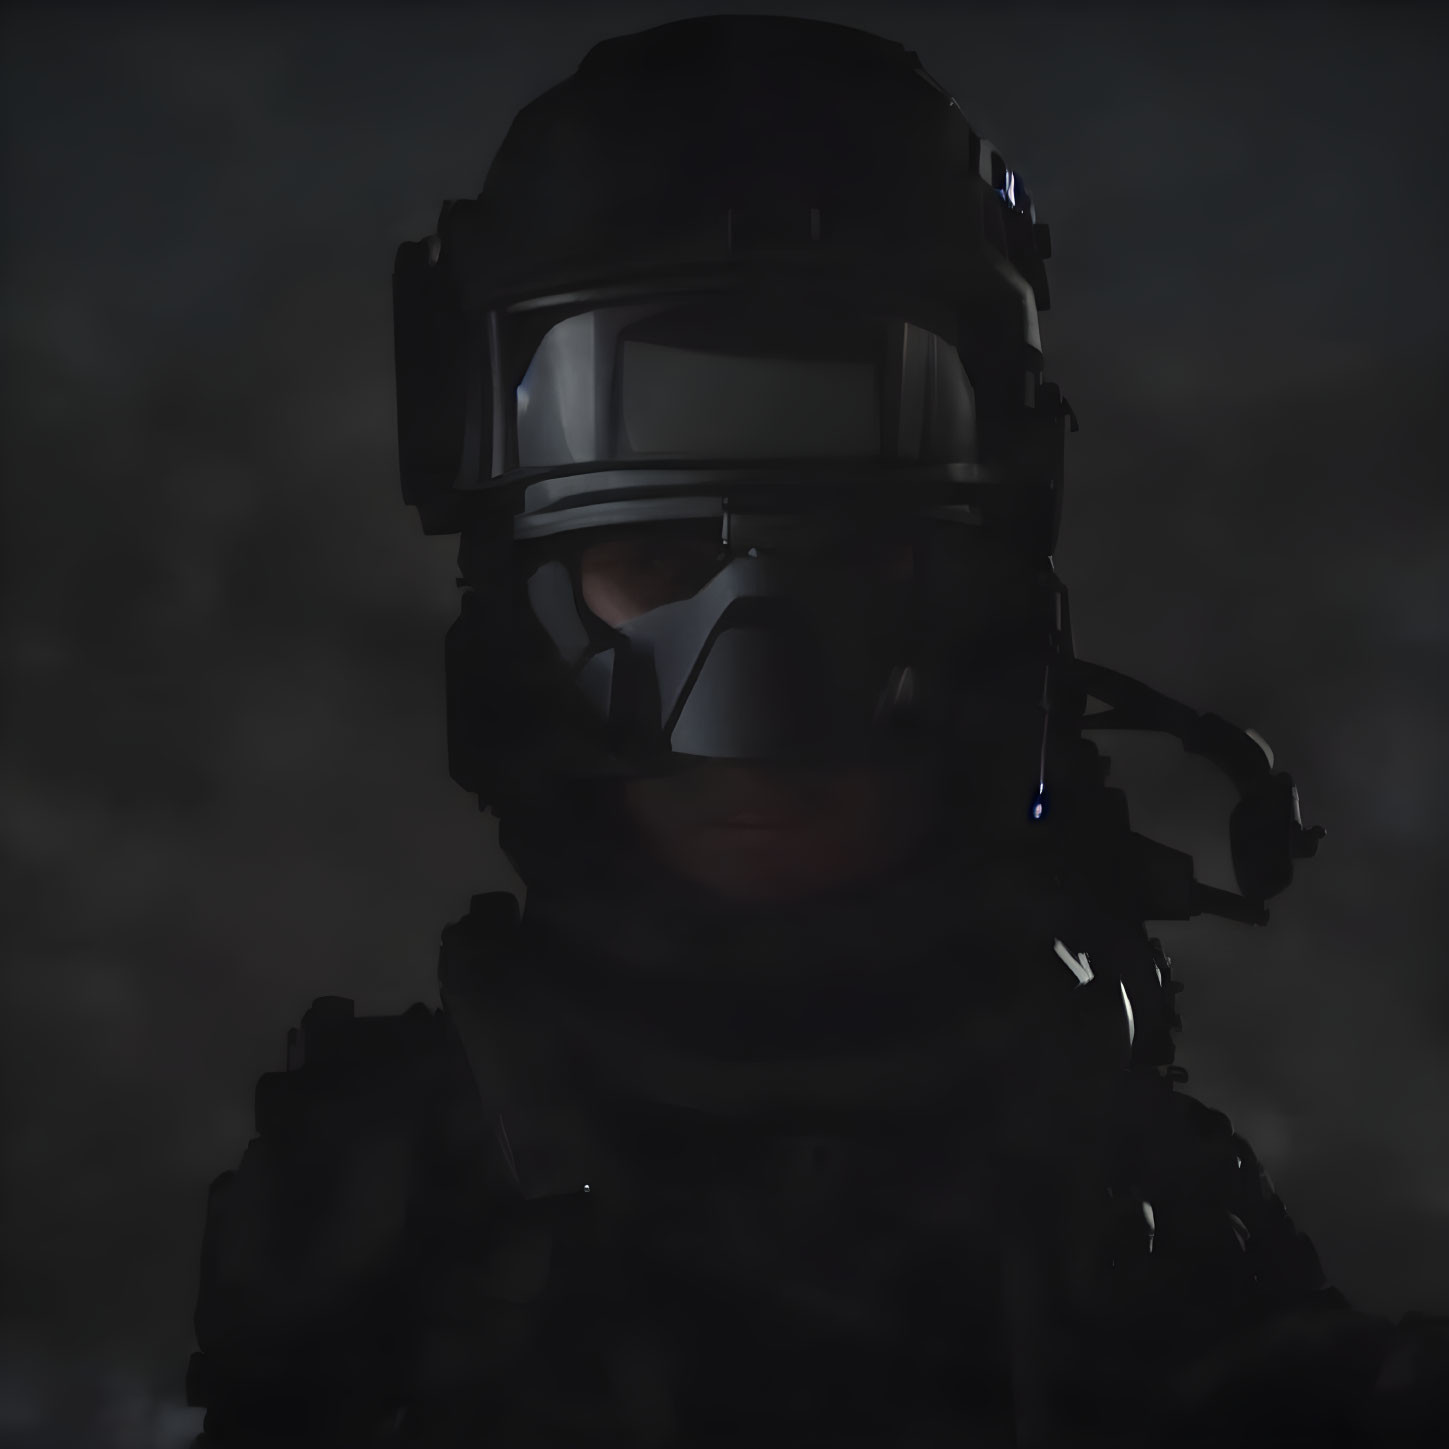 Shadowy Figure in Tactical Gear with Helmet and Visor Against Dark Background